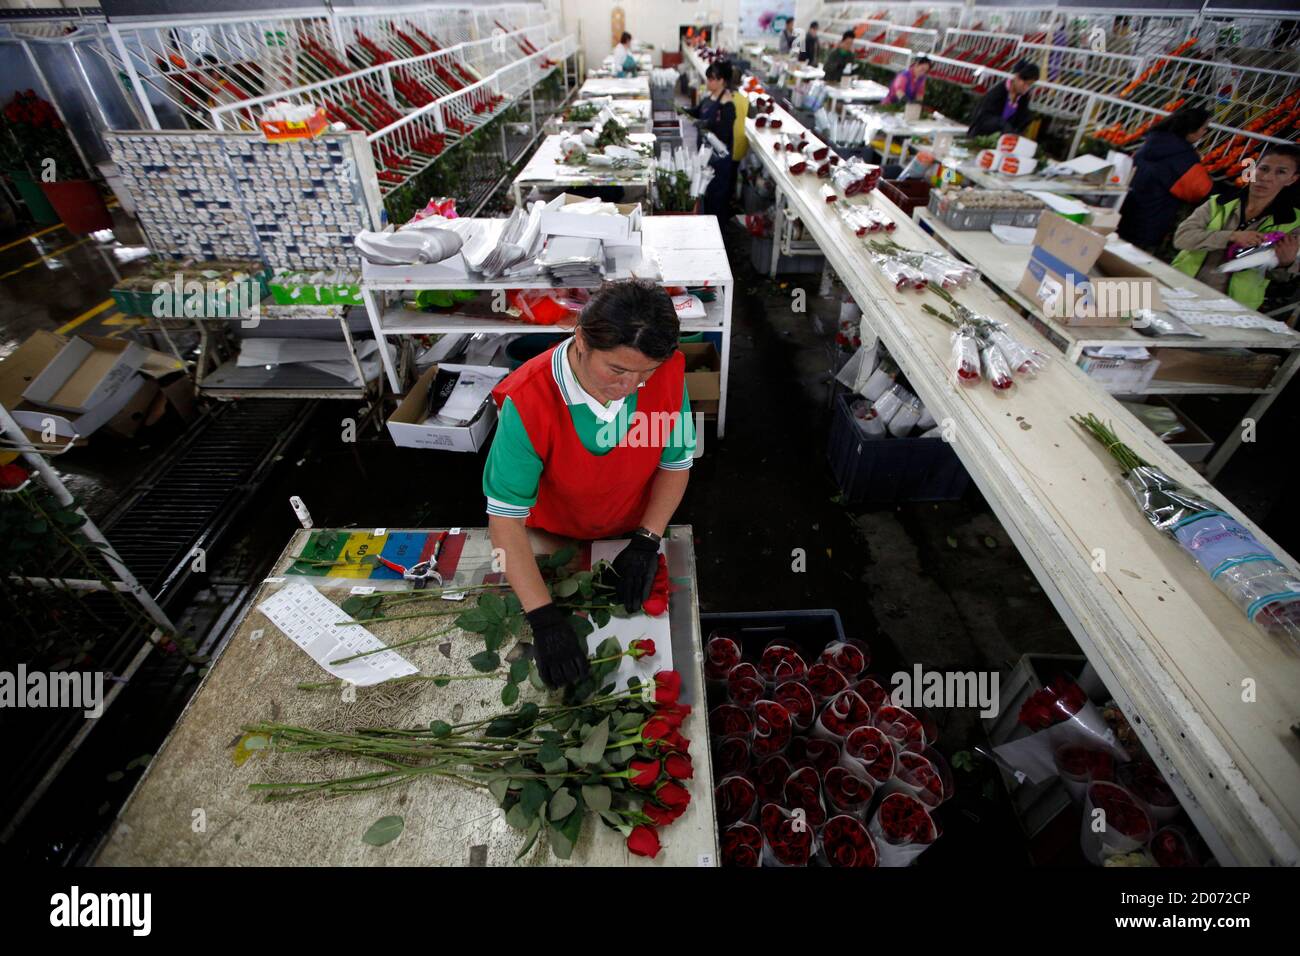 Workers prepare roses for export before Valentine's Day at Elite Flowers in Facatativa February 6, 2013. Valentine's Day is marked on February 14, with many people giving loved ones flowers as a token of their affection. But a troubled global economy has some growers in Colombia worried about this year's crop. REUTERS/John Vizcaino  (COLOMBIA - Tags: BUSINESS ENVIRONMENT) Stock Photo